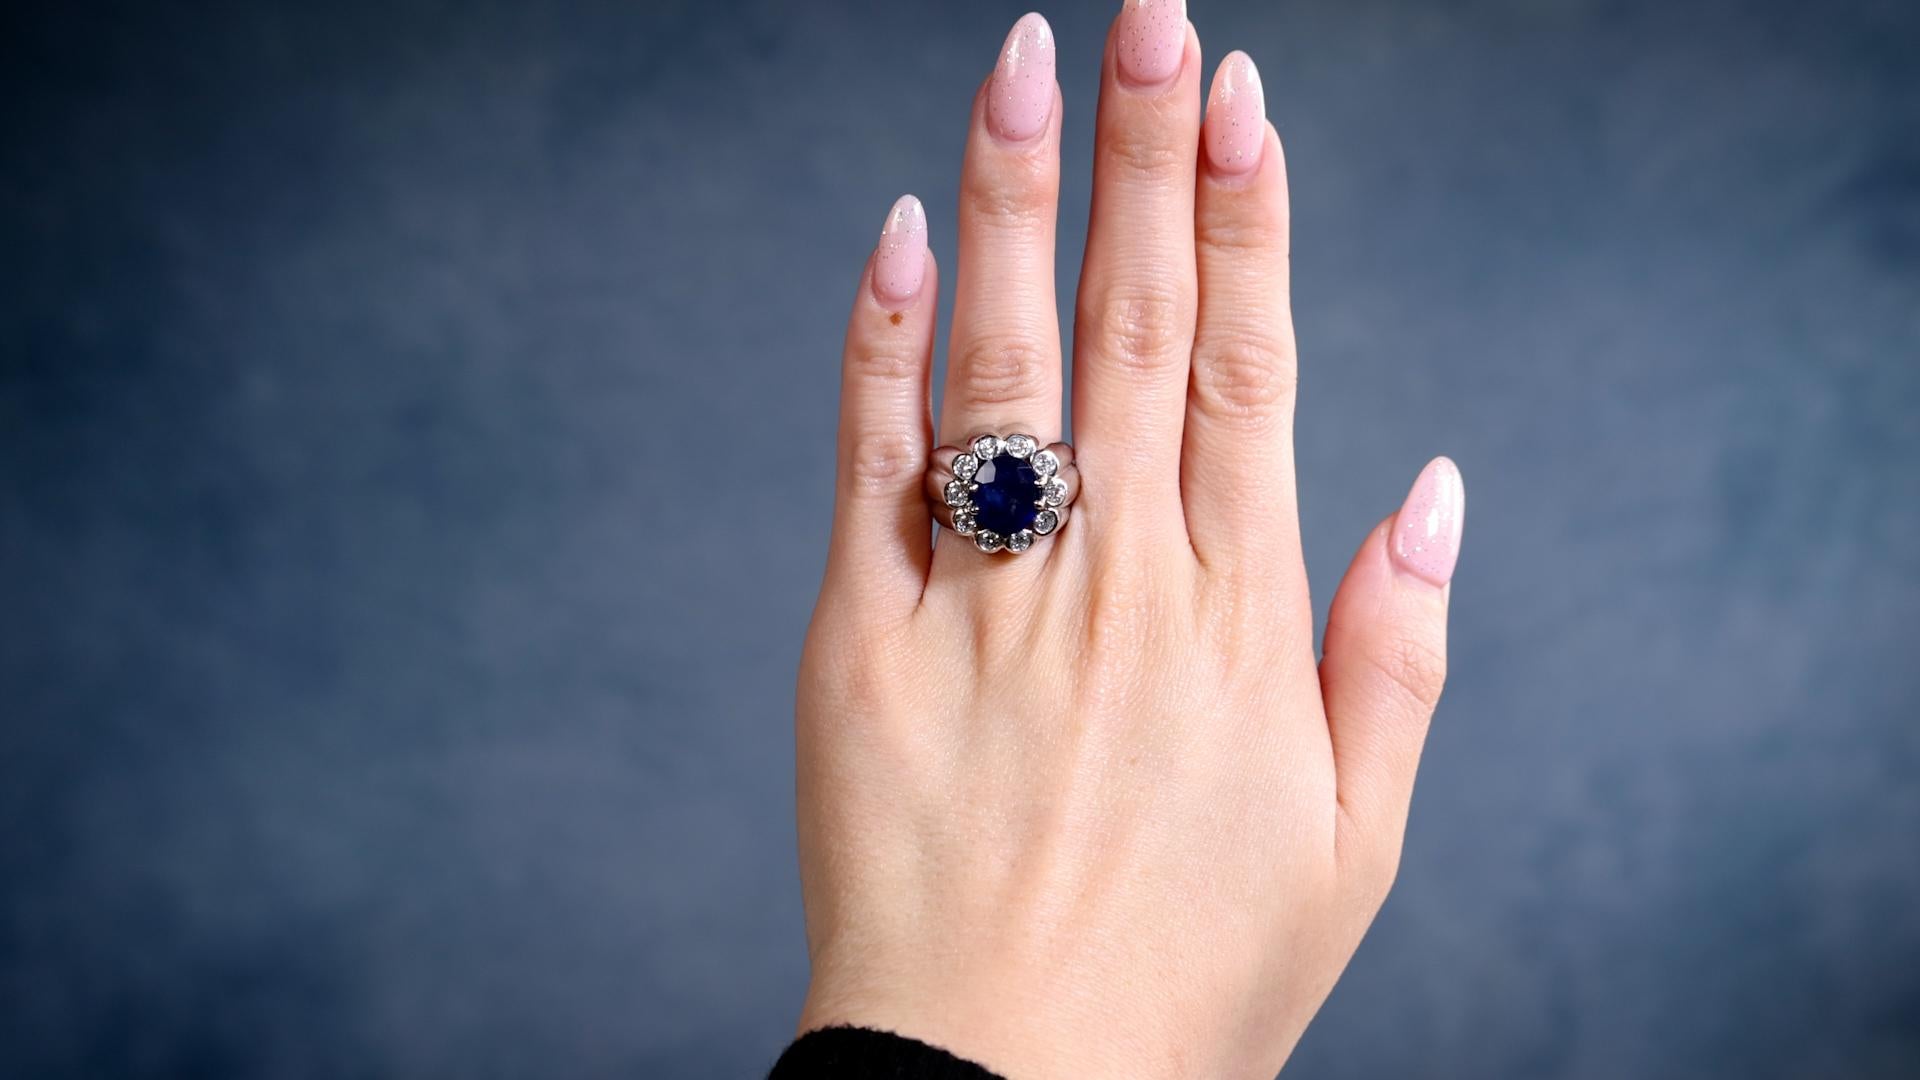 One Mid-Century French Sapphire and Diamond Platinum Ring. Featuring one oval mixed cut sapphire of 5.10 carats. Accented by ten transitional cut diamonds with a total weight of approximately 0.70 carat, graded F-G color, VS-SI clarity. Crafted in